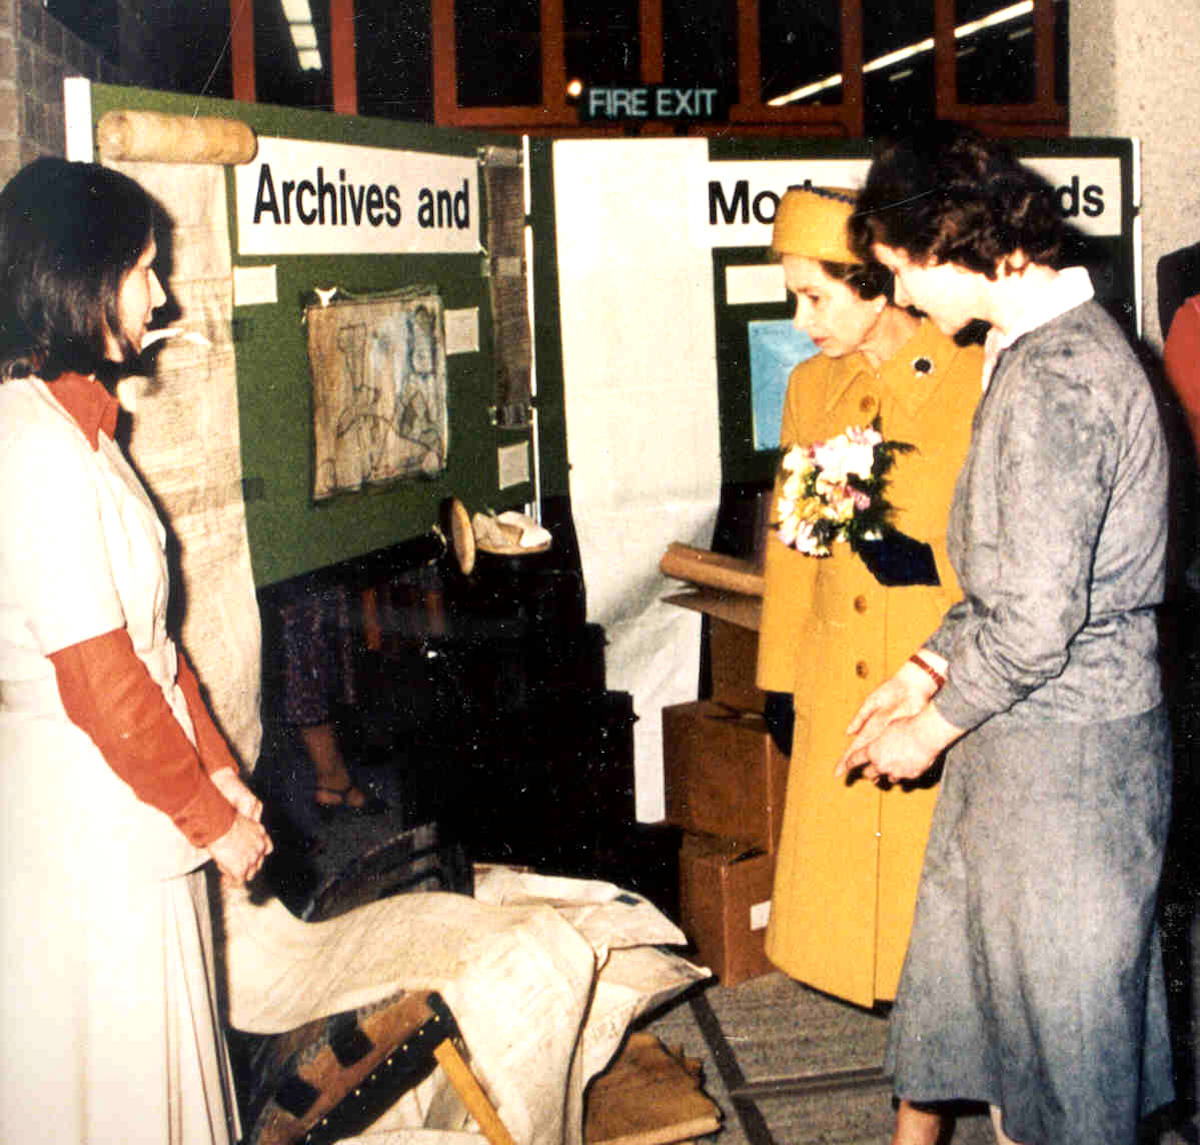 Amanda Arrowsmith County Archivist at the RBA 1979 to 1982 standing with Her Majesty Queen Elizabeth II at the opening of Shire Hall Reading in 1981. Another woman stands facing them.